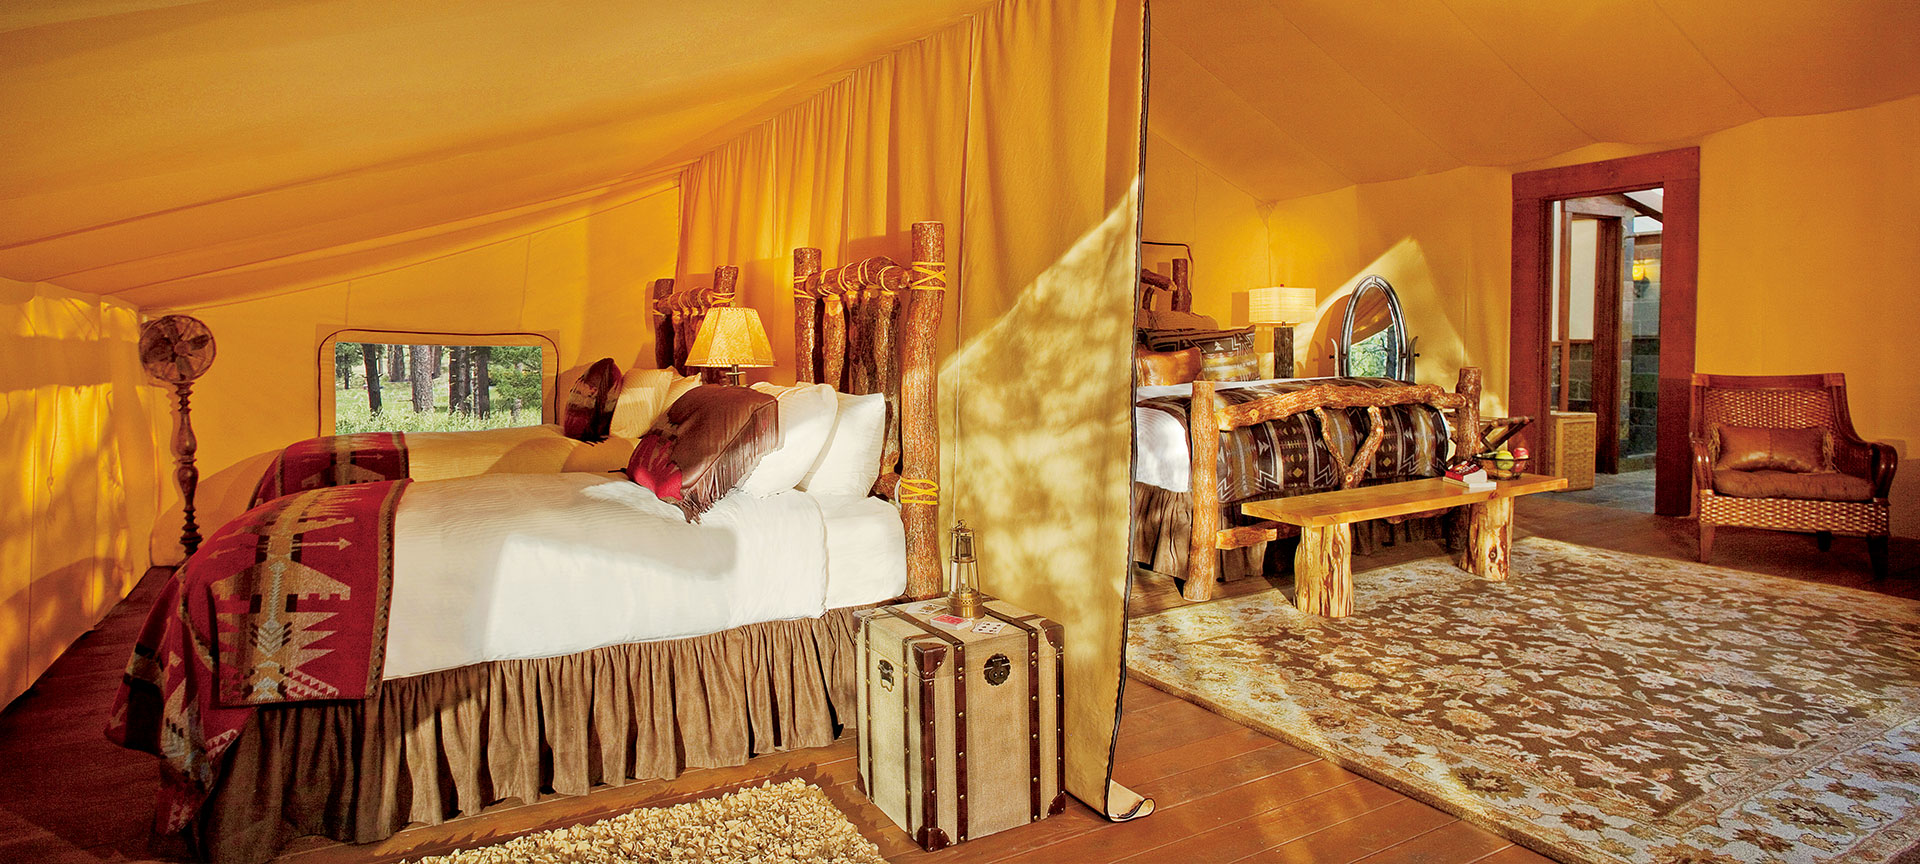 Luxury Glamping Tents The Resort At Paws Up